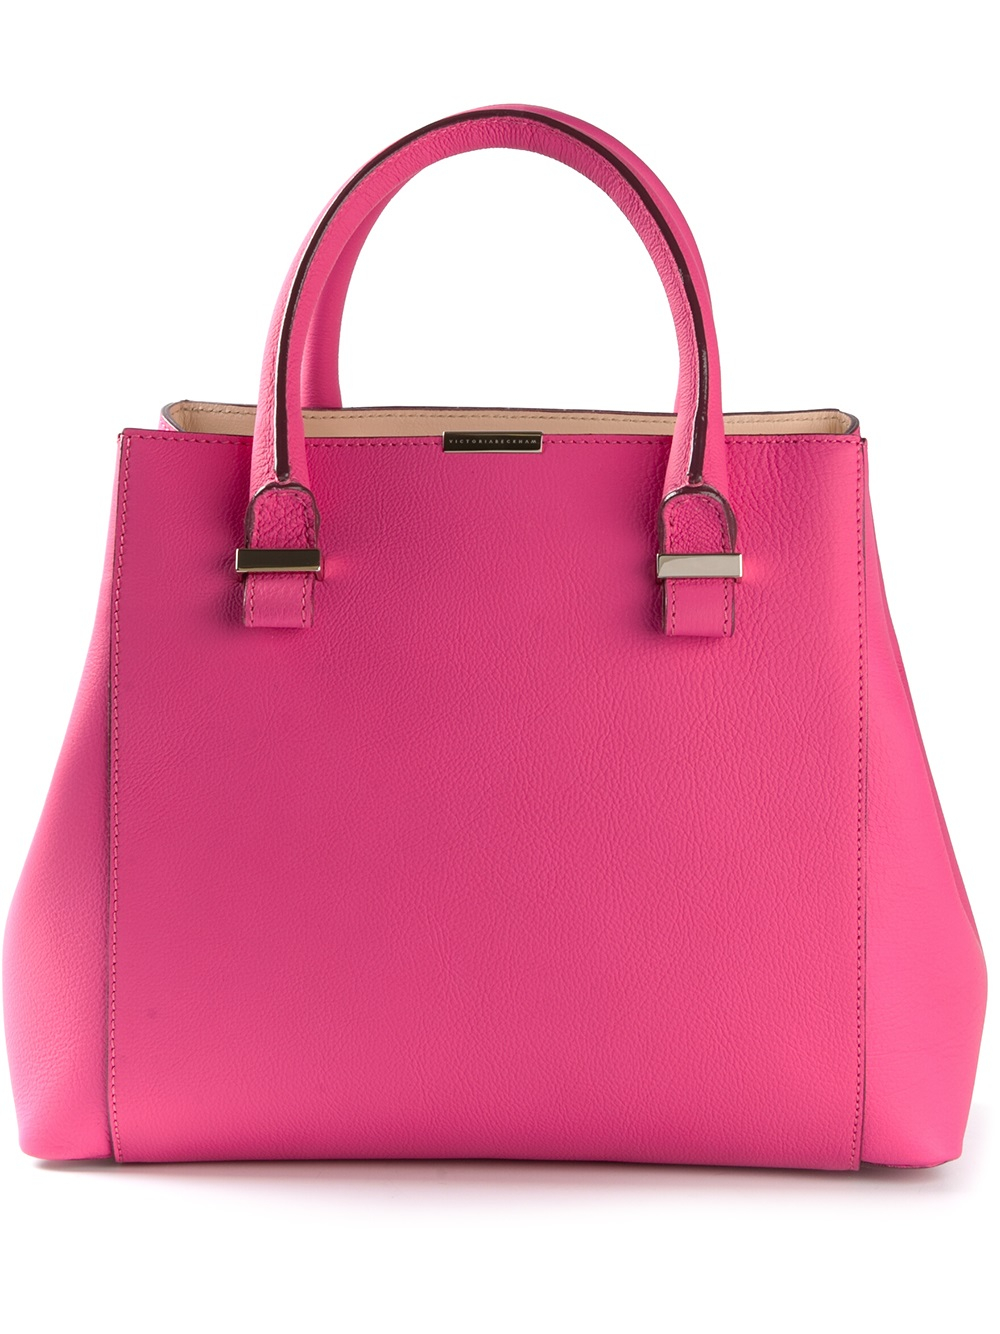 Lyst - Victoria Beckham Quincy Tote Bag in Pink